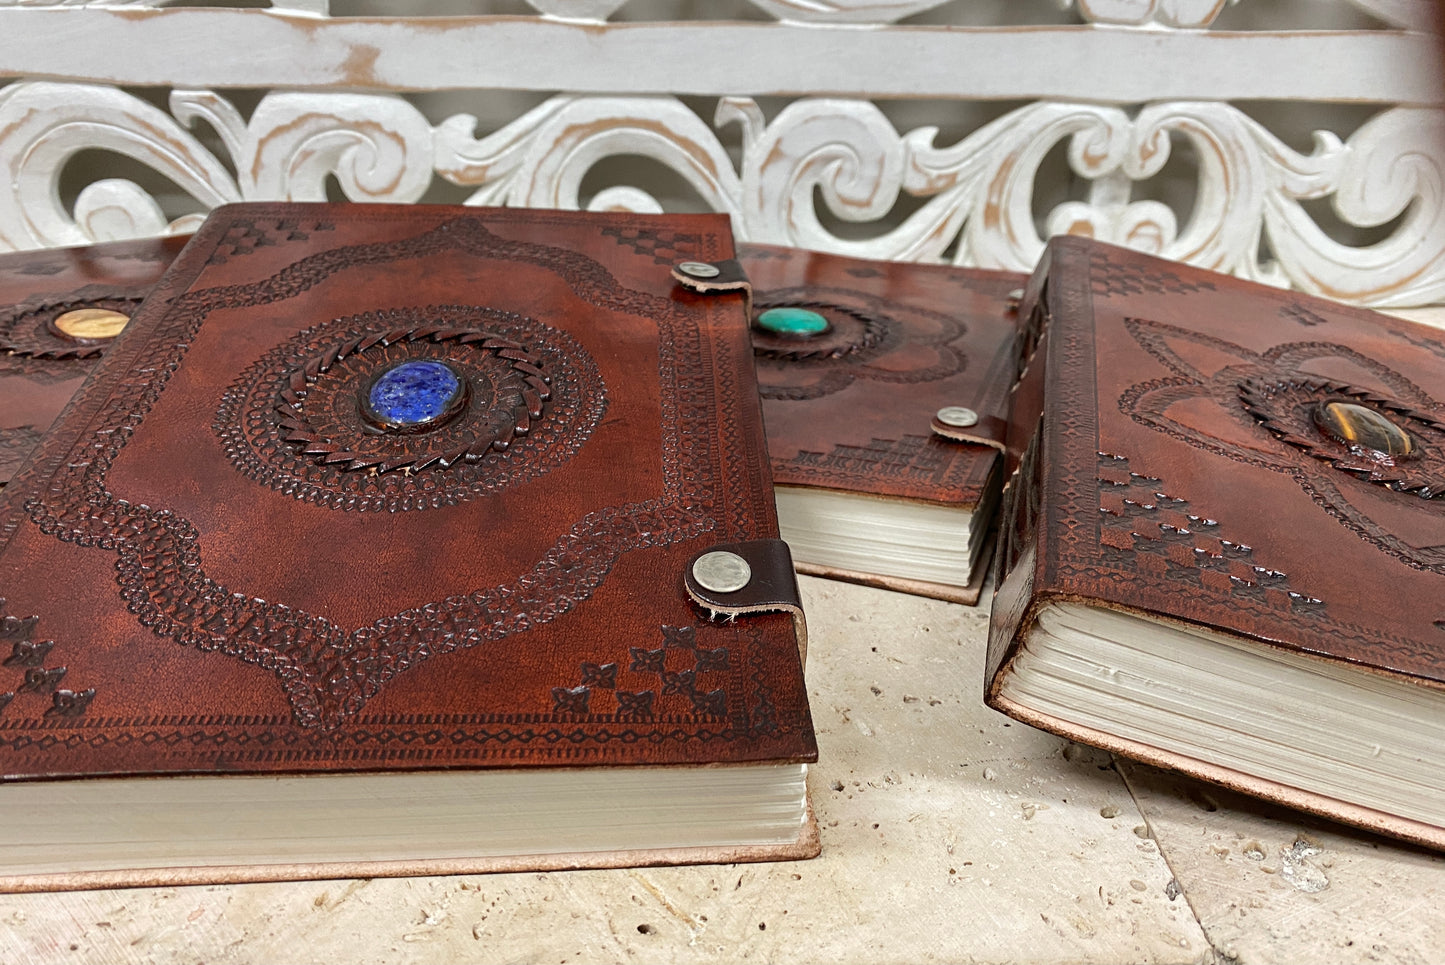 Hand Embossed Camel leather Journal with Gemstones & Button Clasp - 10" x 7" x 1"